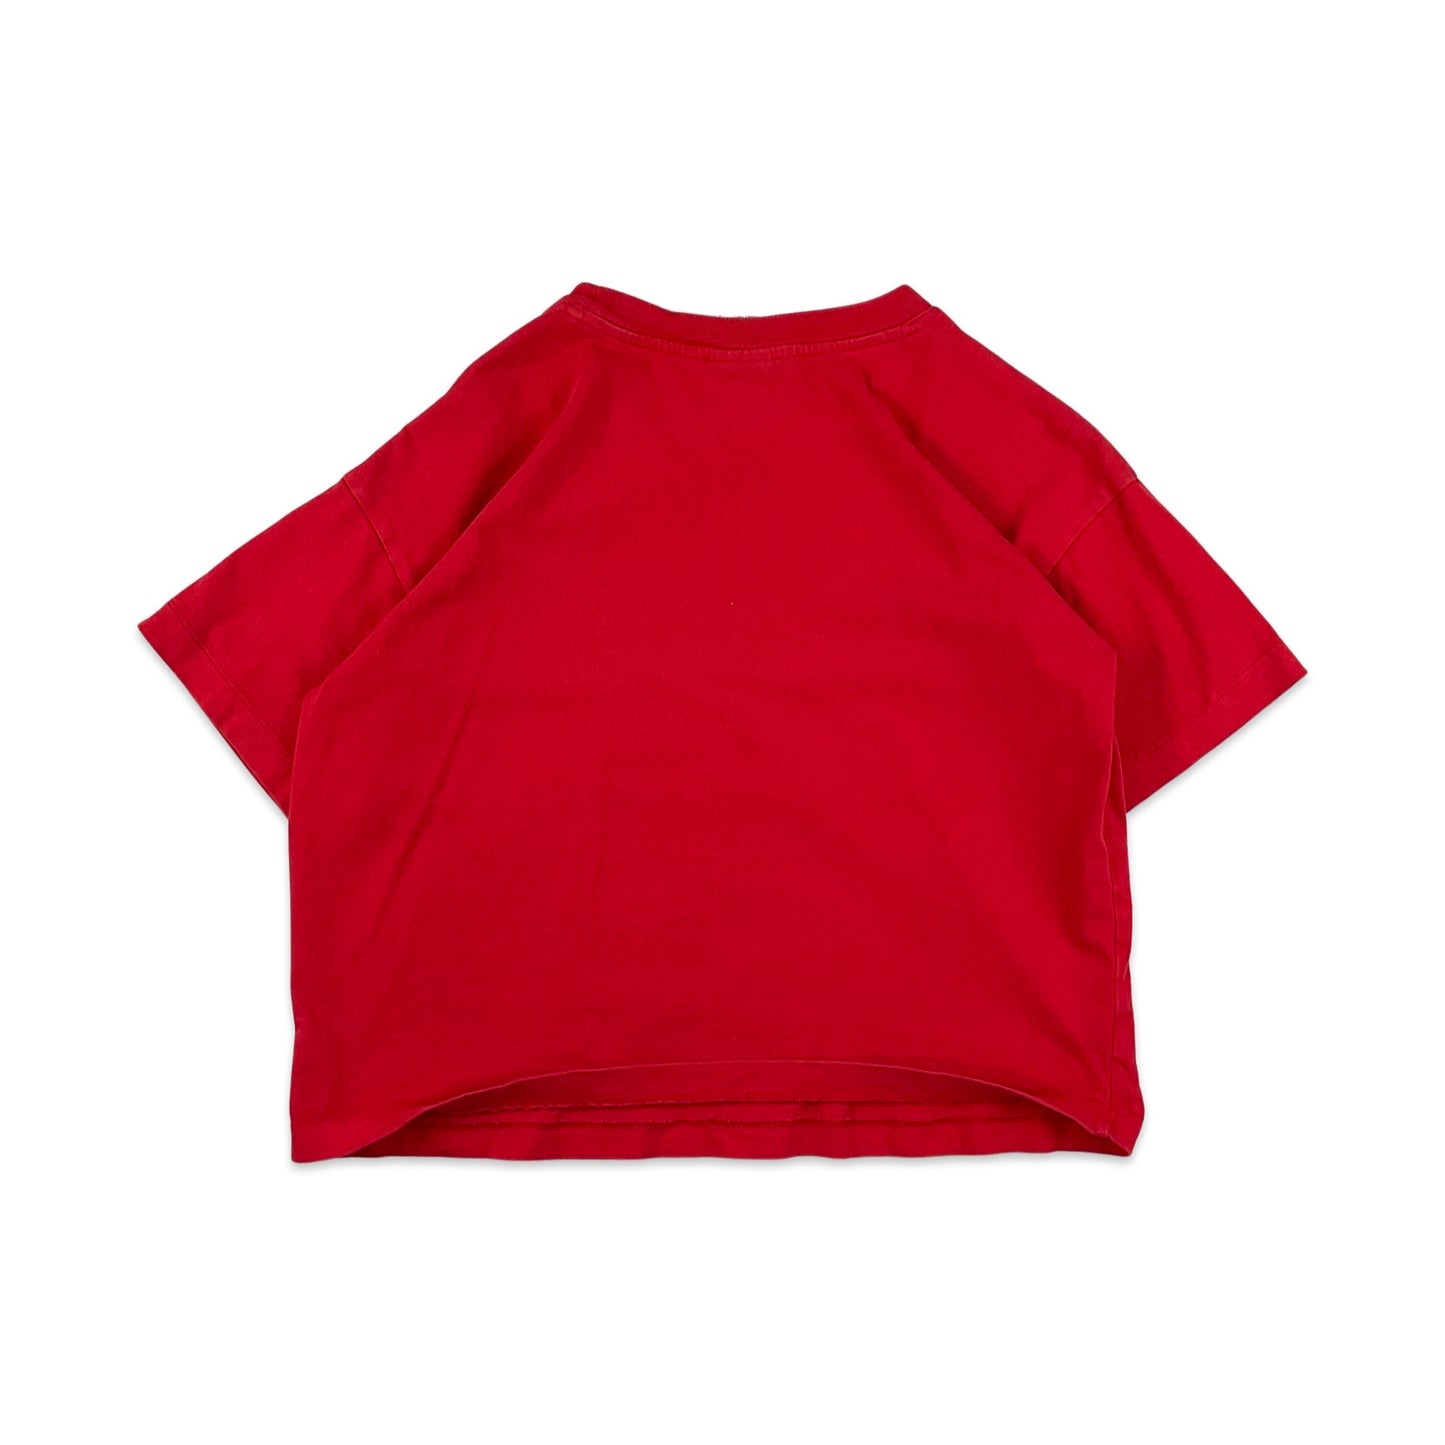 Champion Red Cropped Tee XS S